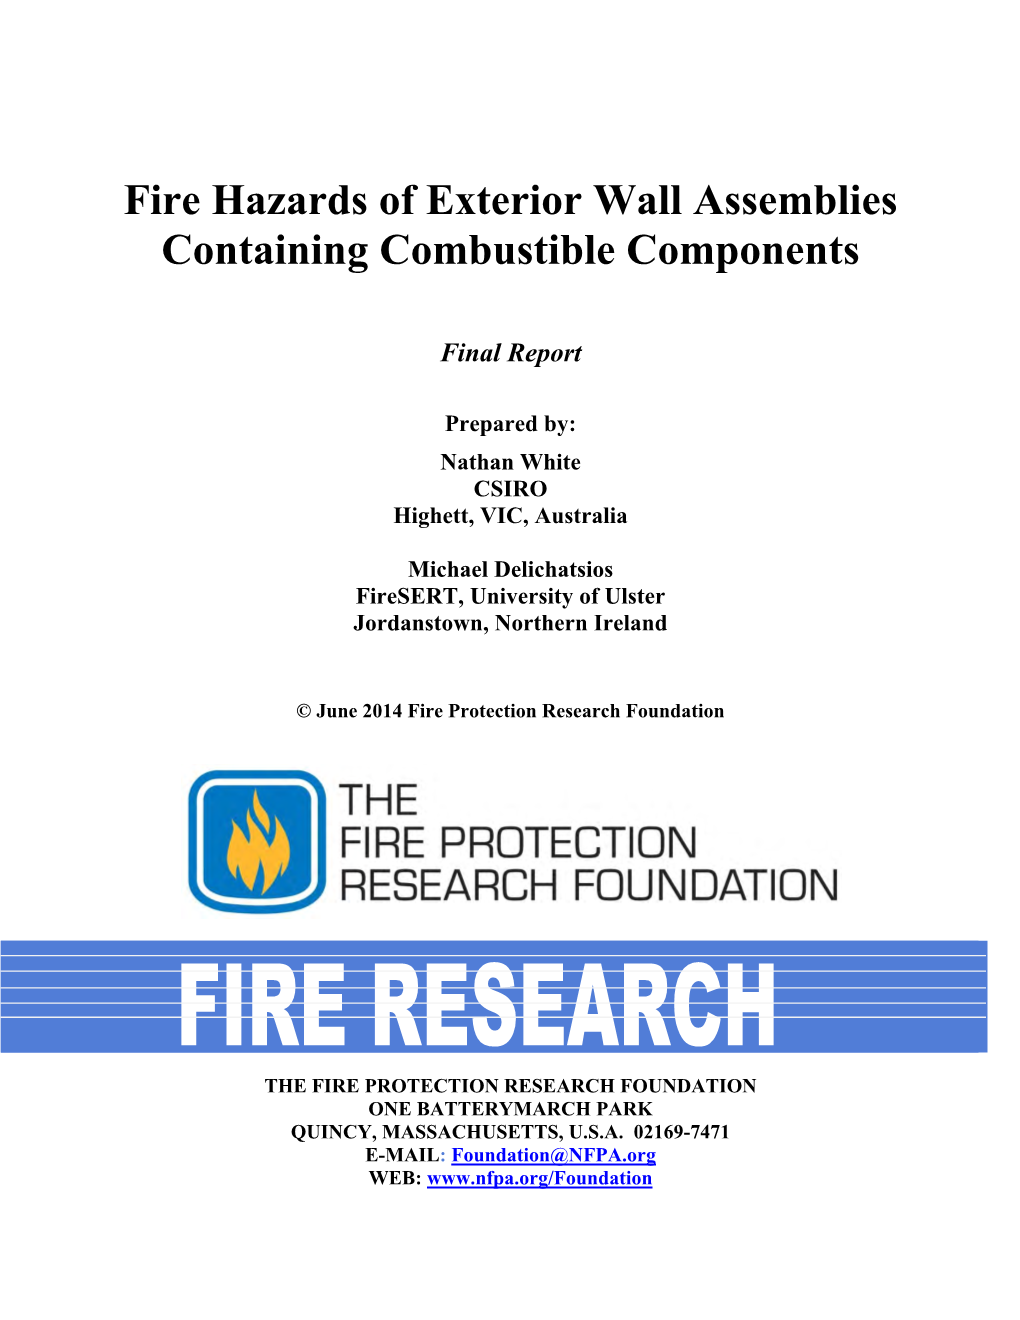 Fire Hazards of Exterior Wall Assemblies Containing Combustible Components